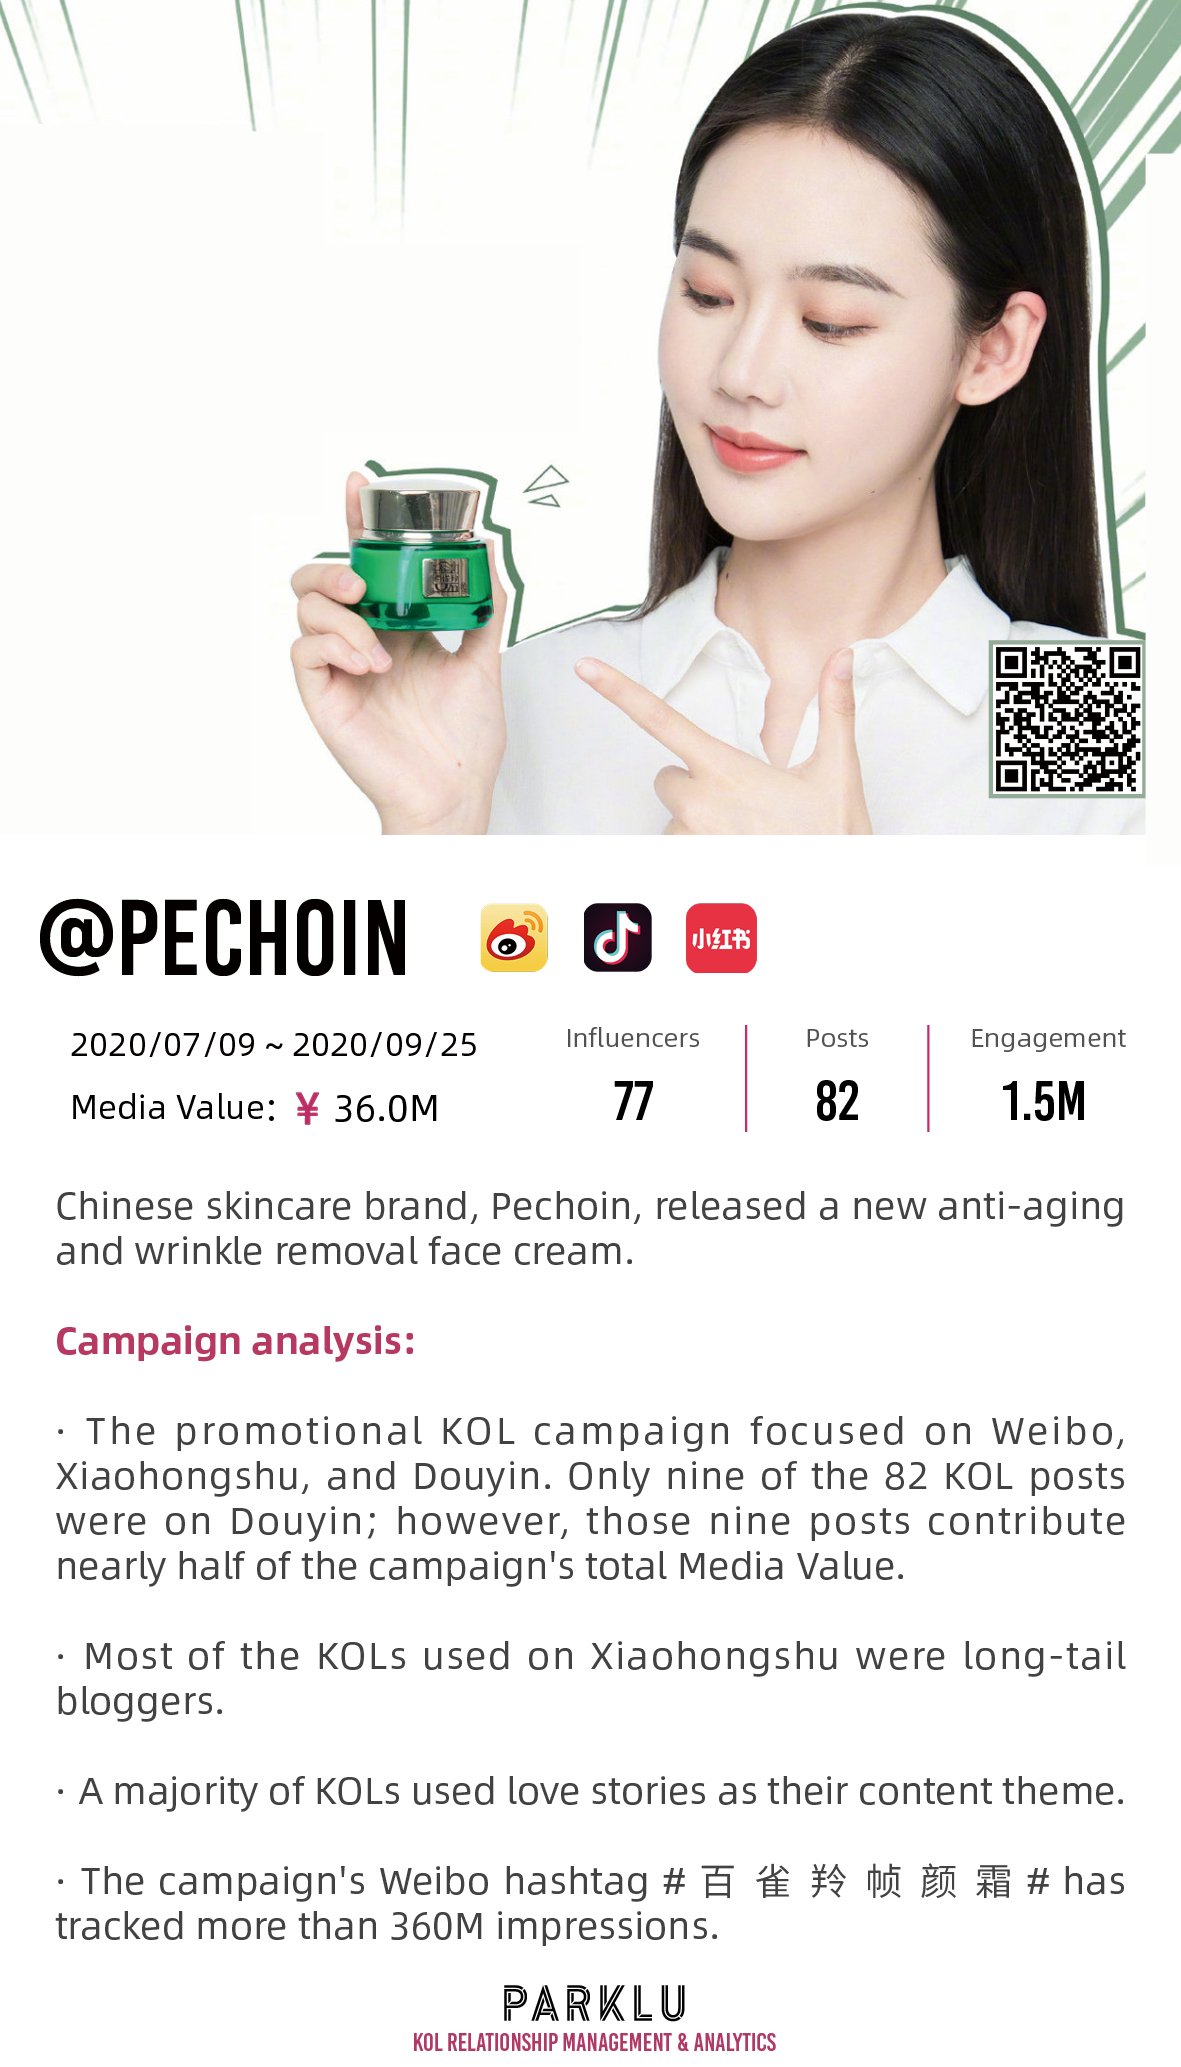 Pechoin's New Anti-aging and Wrinkle Removal Face Cream